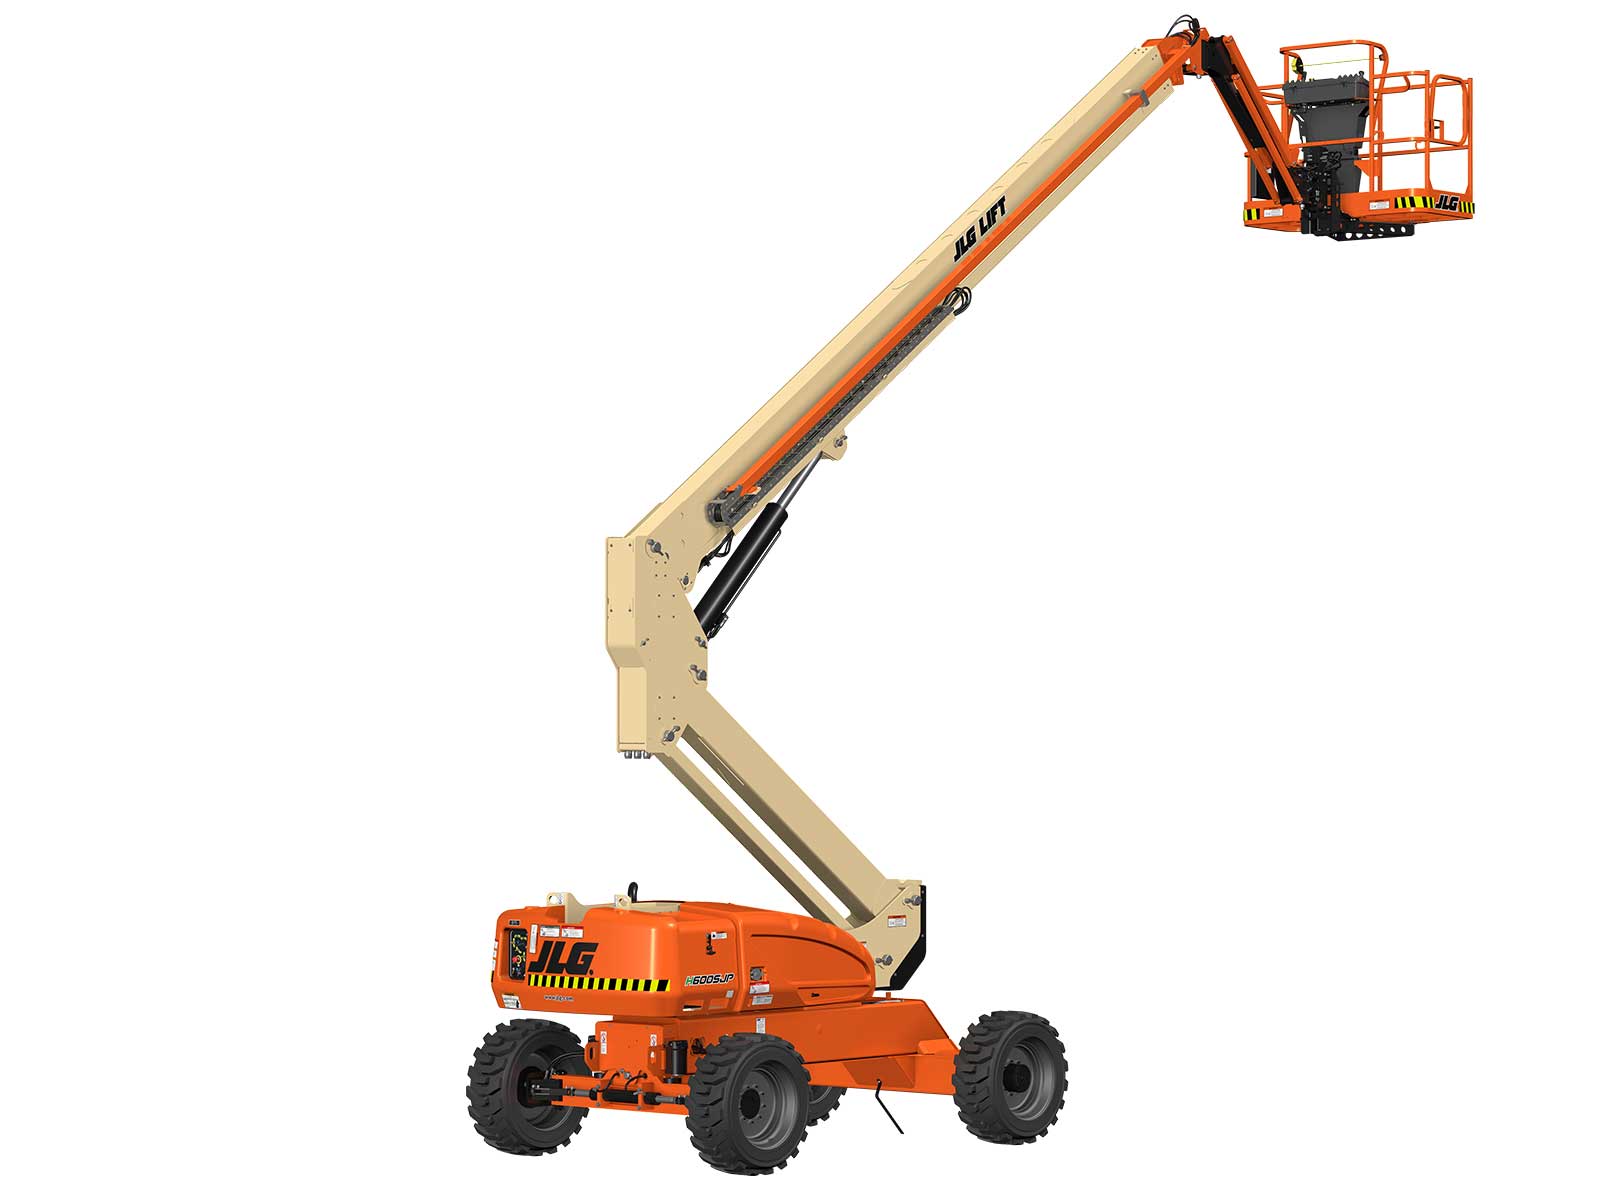 JLG 40H Telescopic Boom Lifts Auction Results